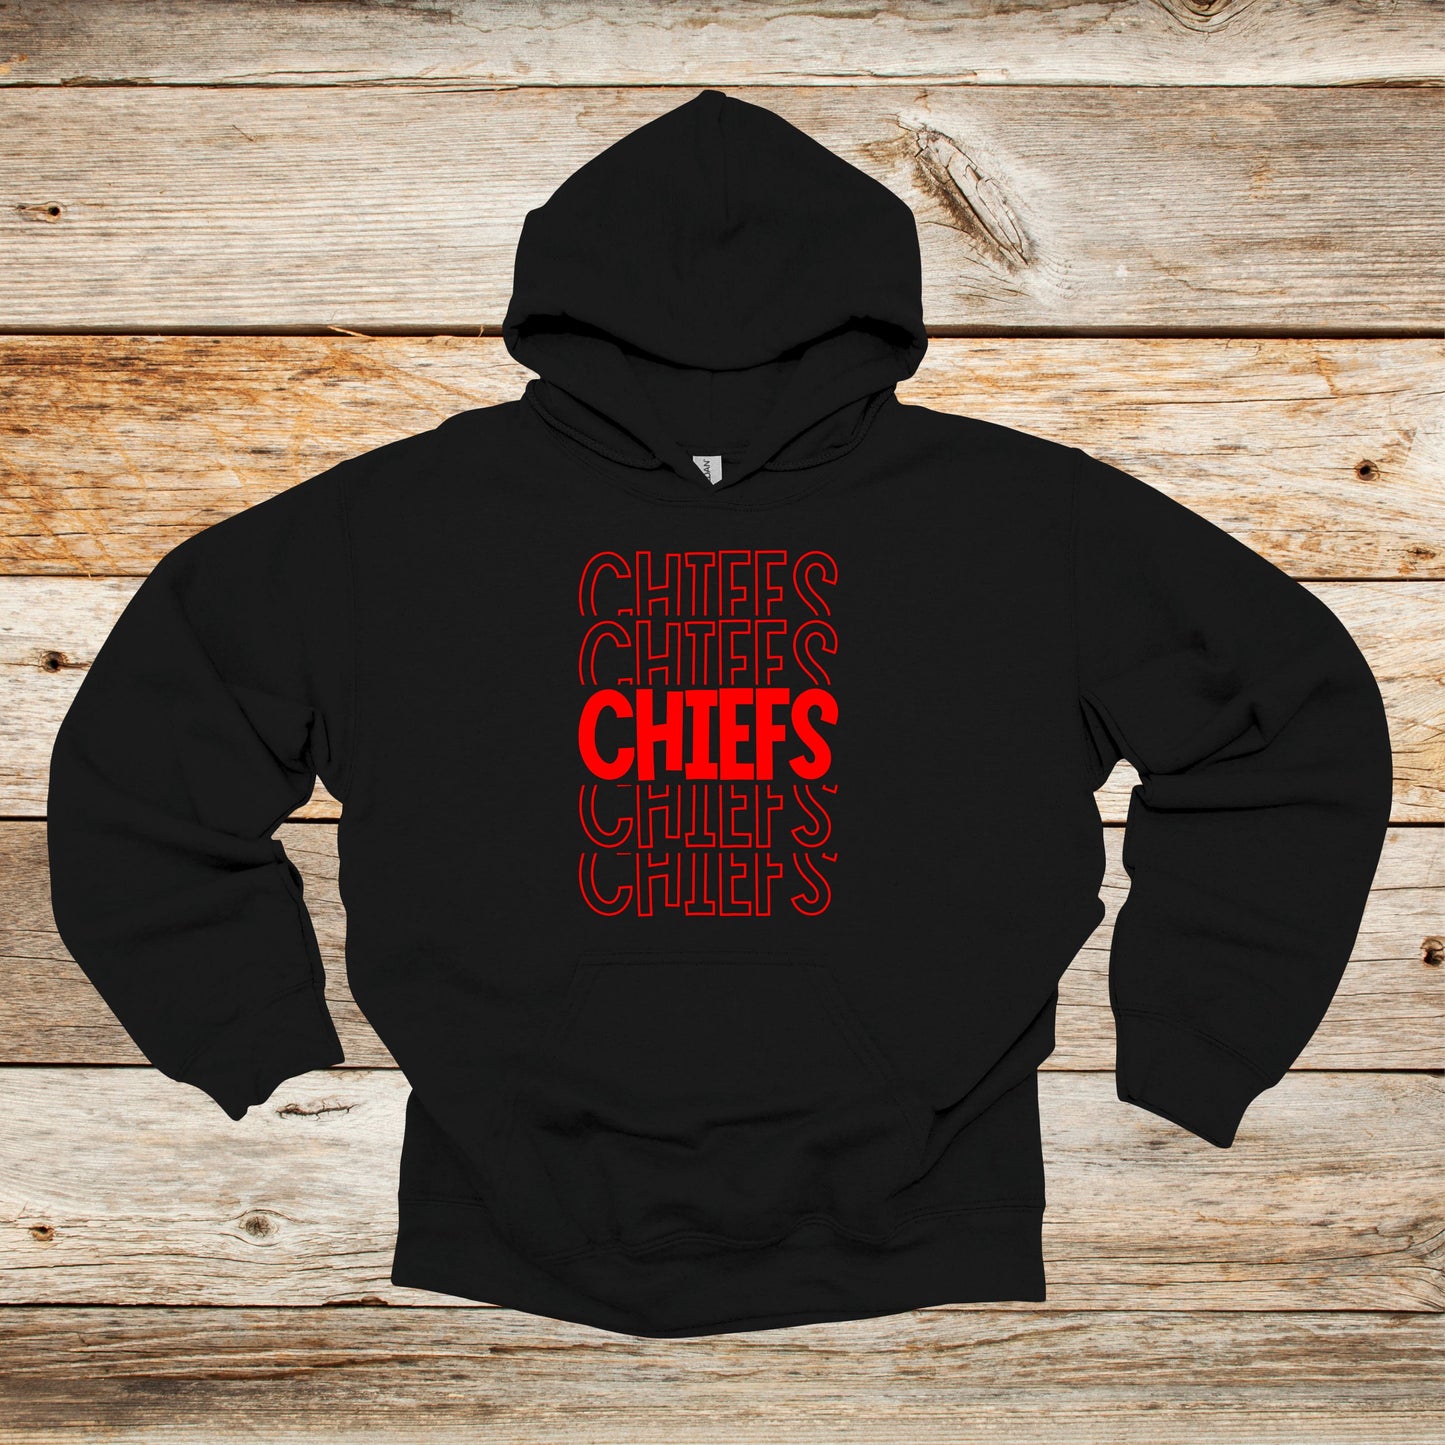 Football Crewneck and Hooded Sweatshirt - Chiefs Football - Chiefs - Adult and Children's Tee Shirts - Sports Hooded Sweatshirt Graphic Avenue Hooded Sweatshirt Black Adult Small